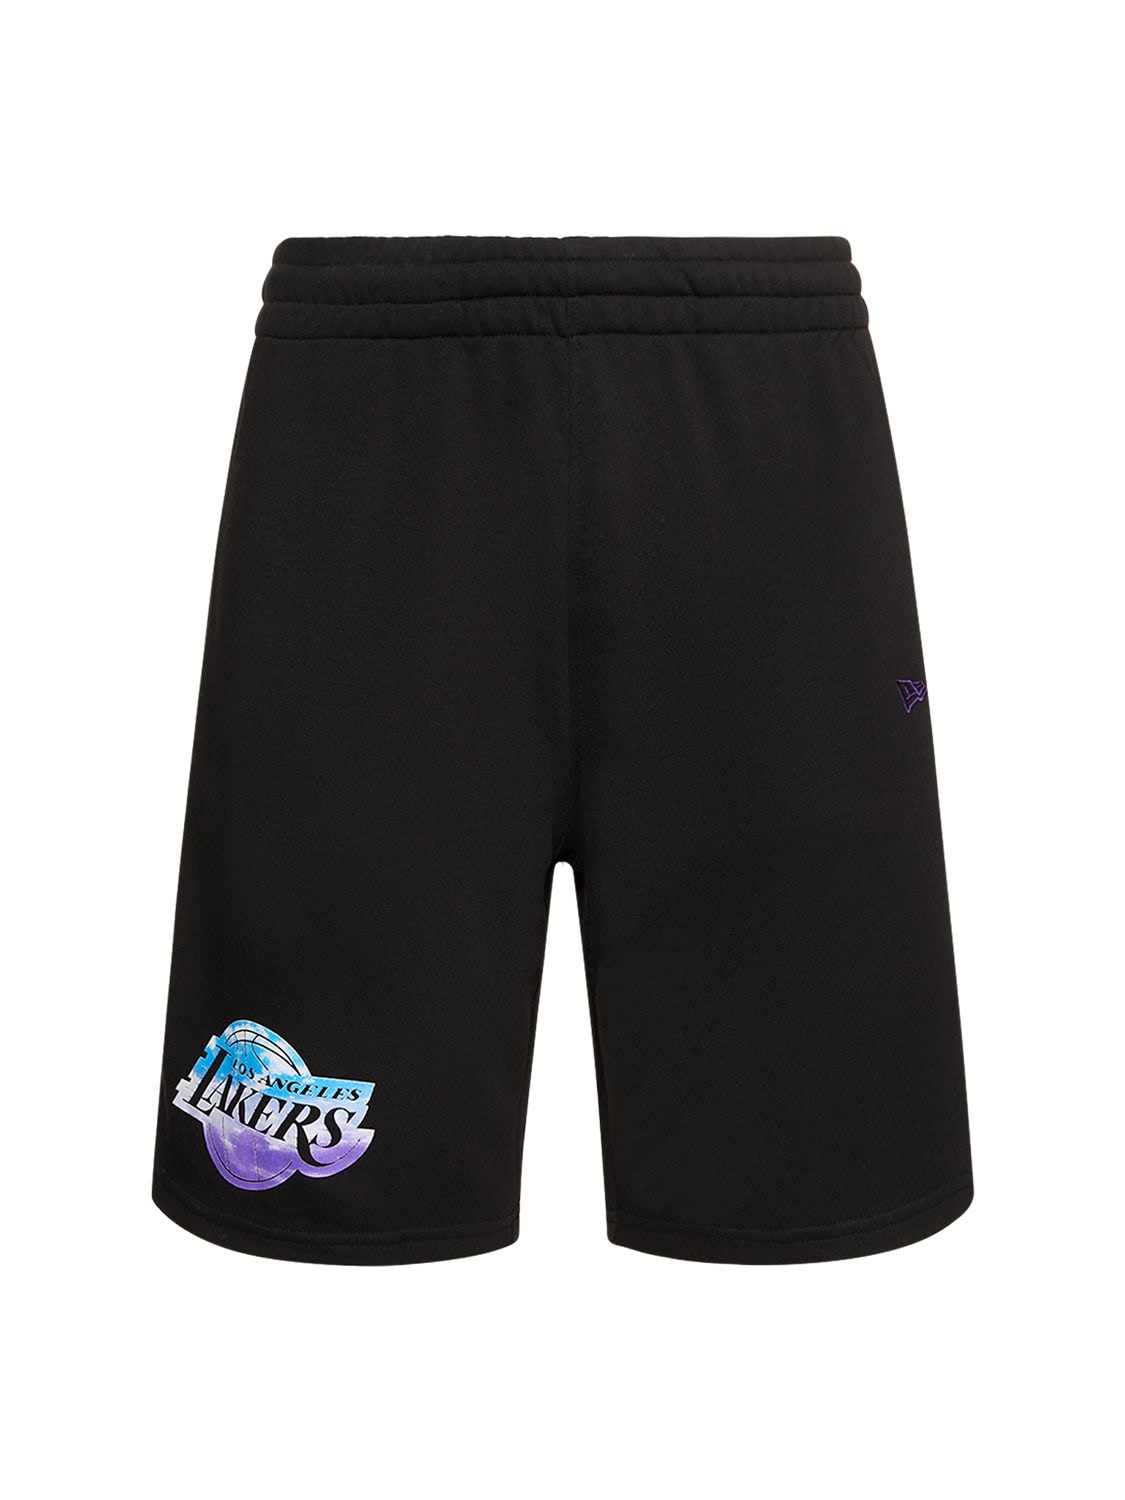 Image of L.a. Lakers Printed Cotton Blend Shorts